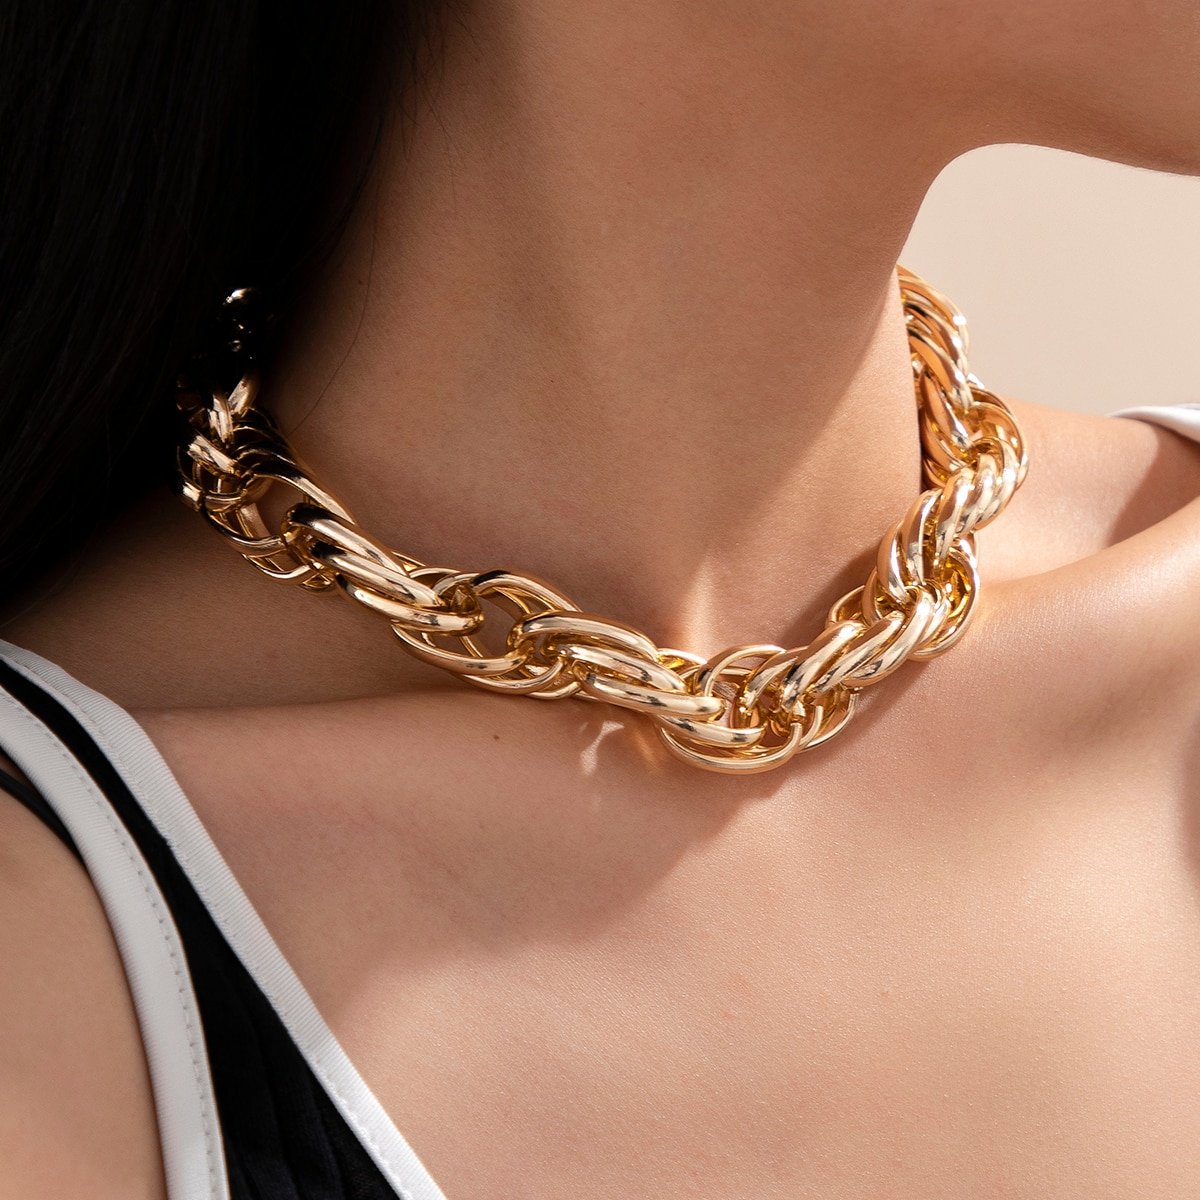 A Stylish Women's Thick Gold Chain Necklace wearing a thick gold chain necklace.